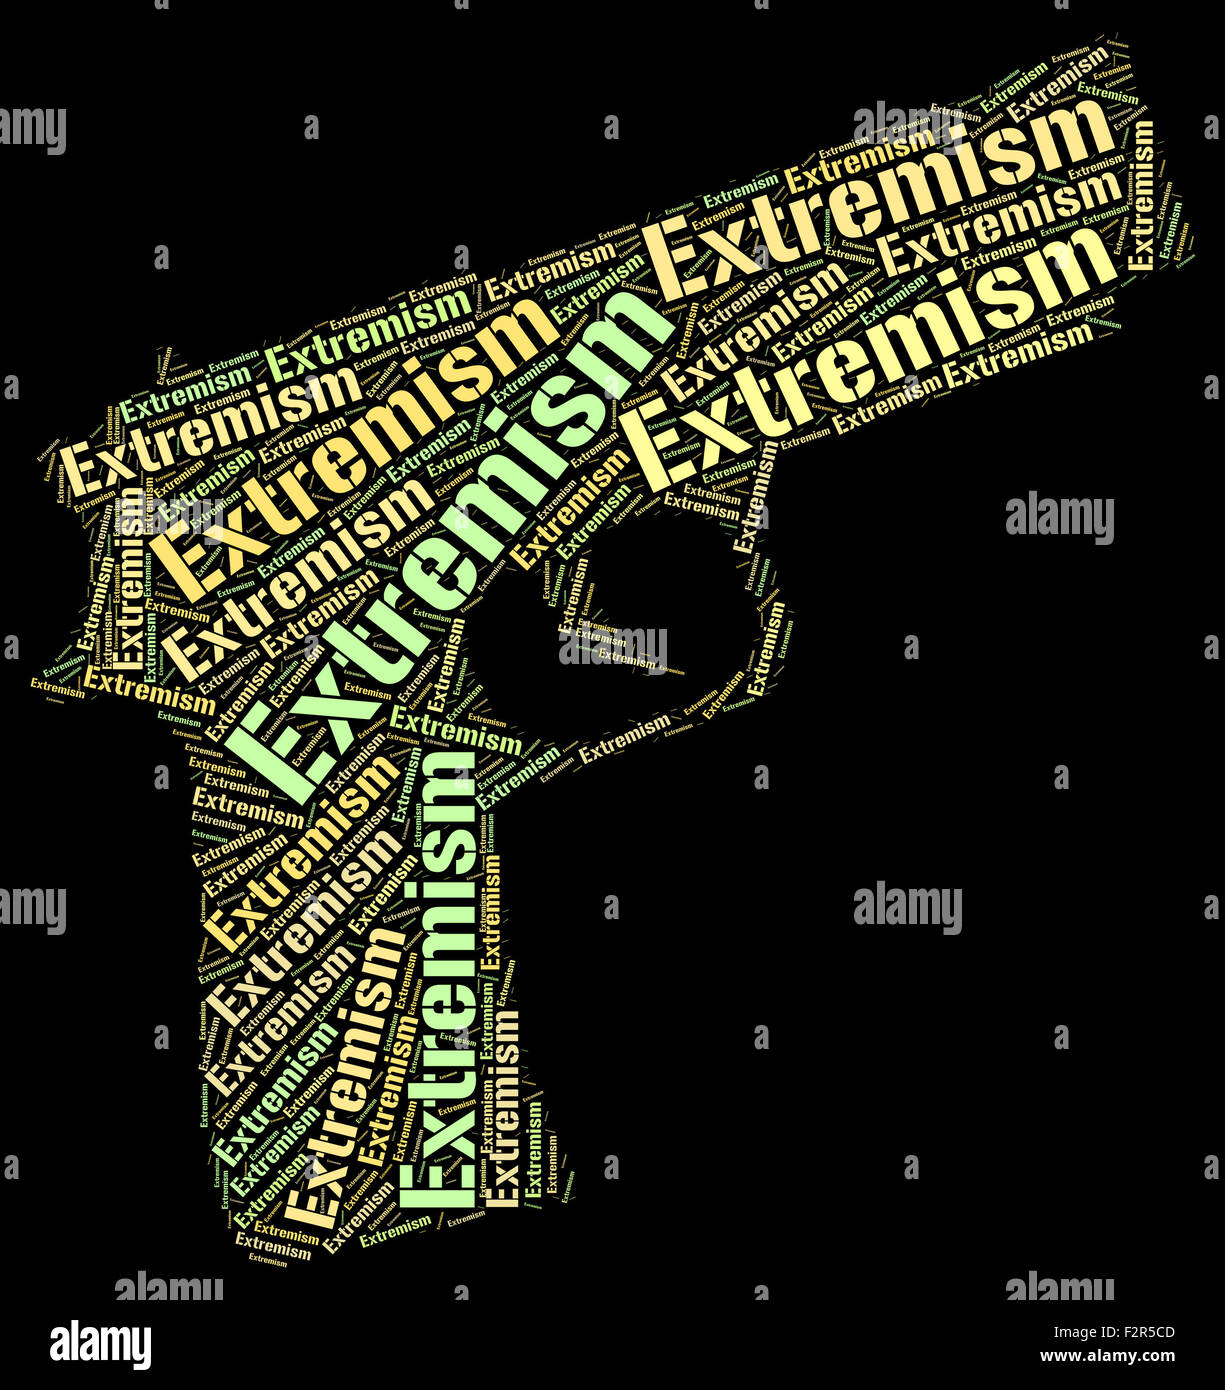 Extremism Word Showing Sectarianism Chauvinism And Extreme Stock Photo